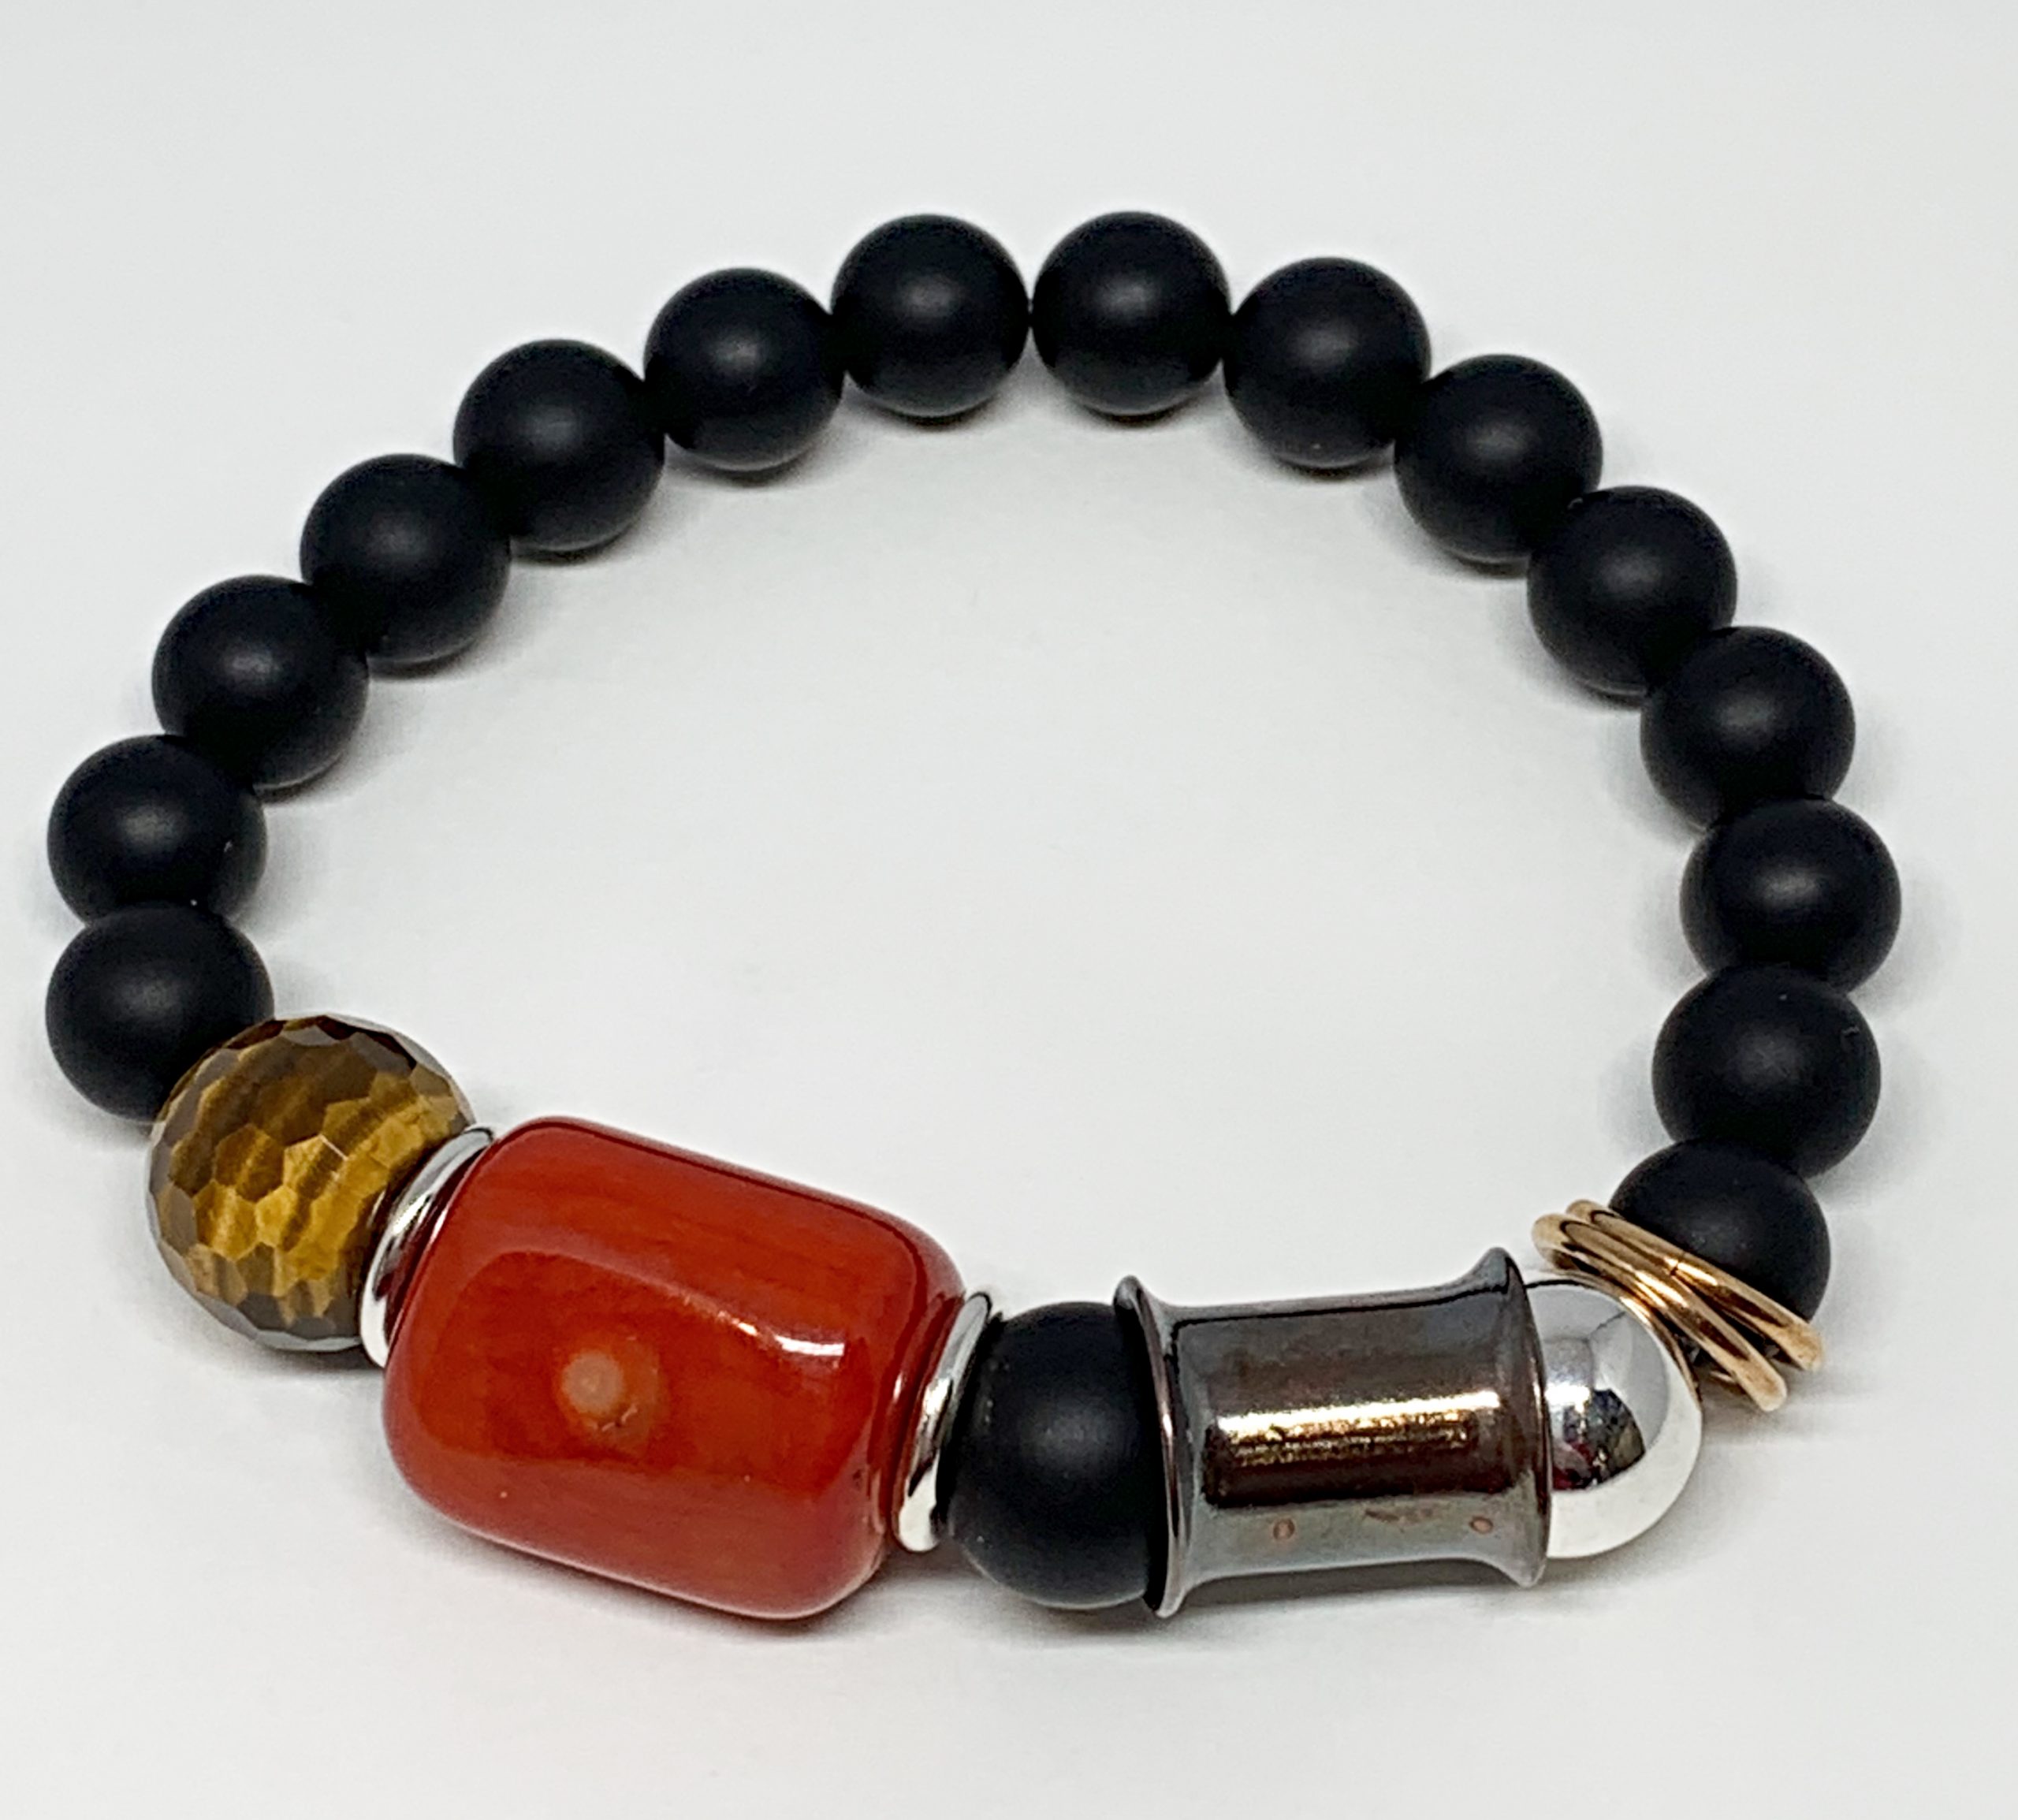 A Touch of Passion, one of a kind onyx, carnelian, tiger's eye, sterling silver, and bronze bracelet by Karyn Chopik | Effusion Art Gallery + Cast Glass Studio, Invermere BC